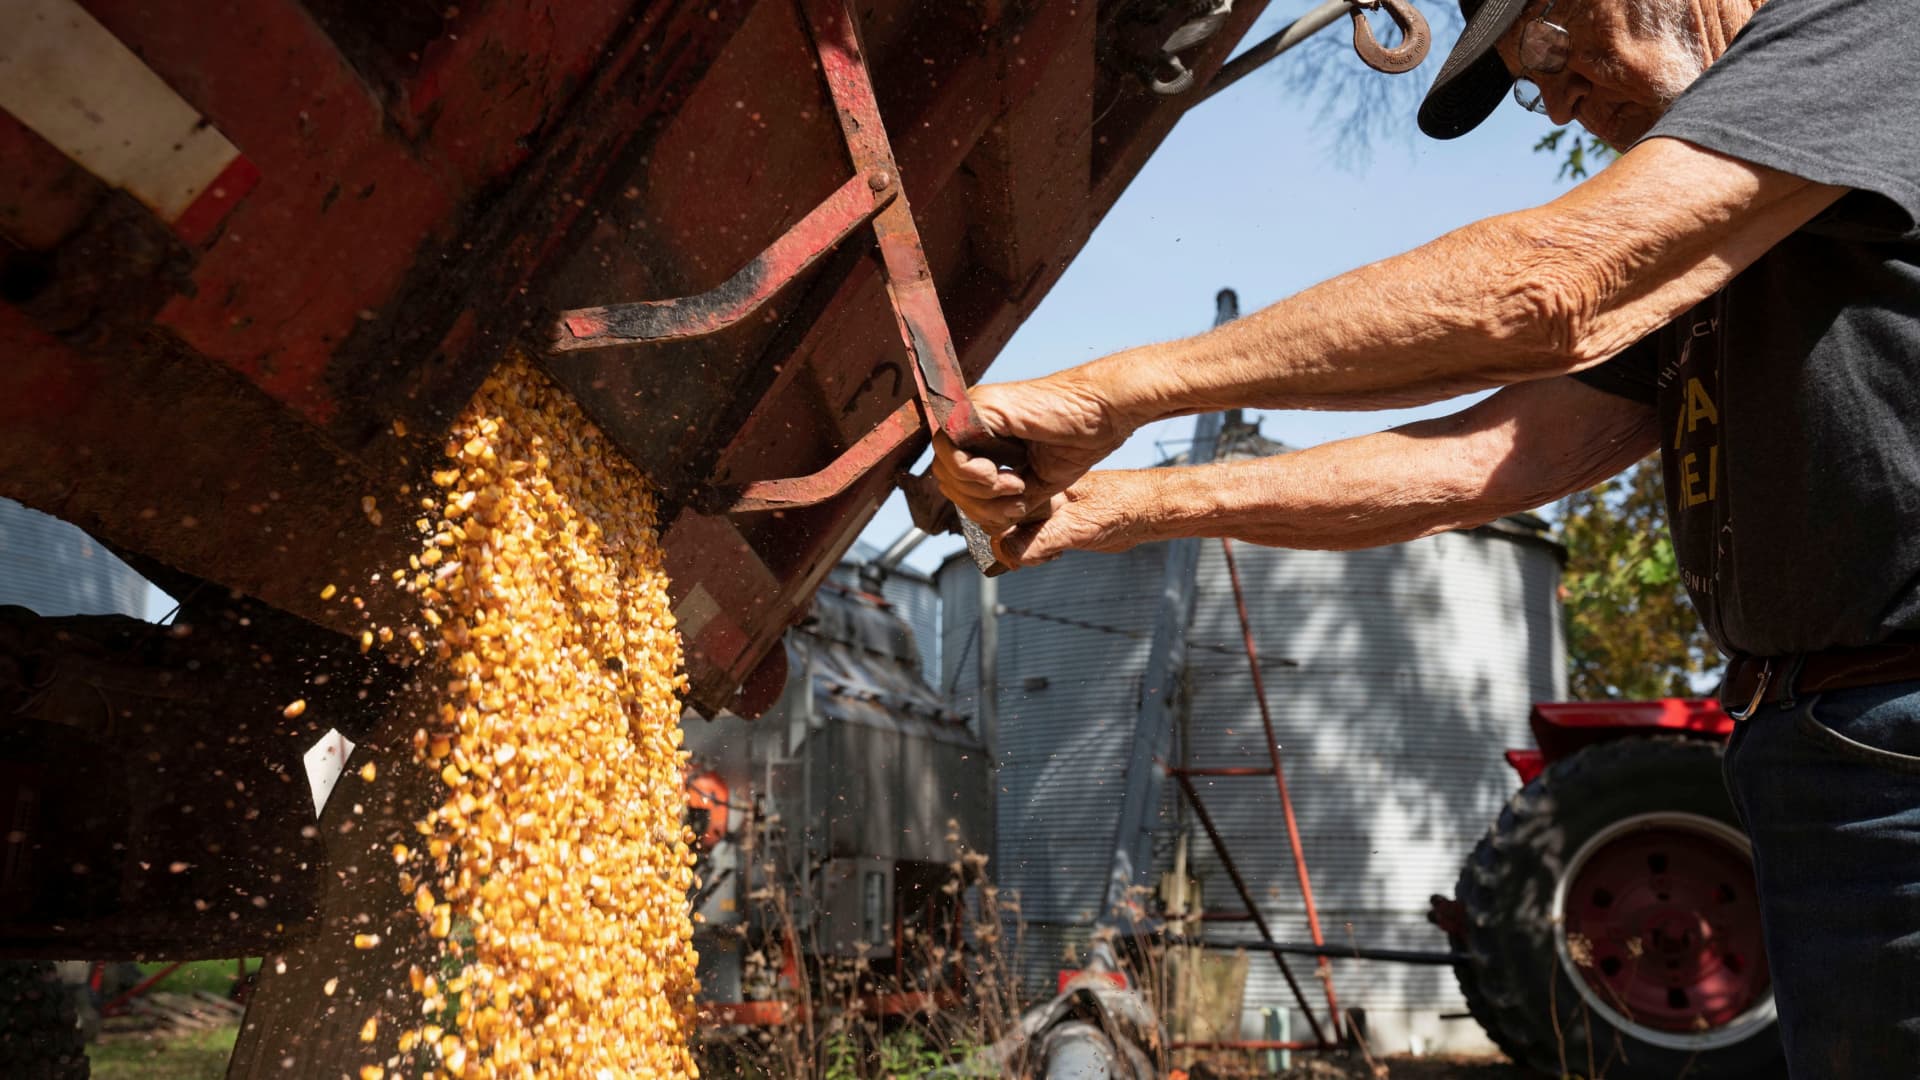 Price of corn hits 9-year high as surge in commodities continues